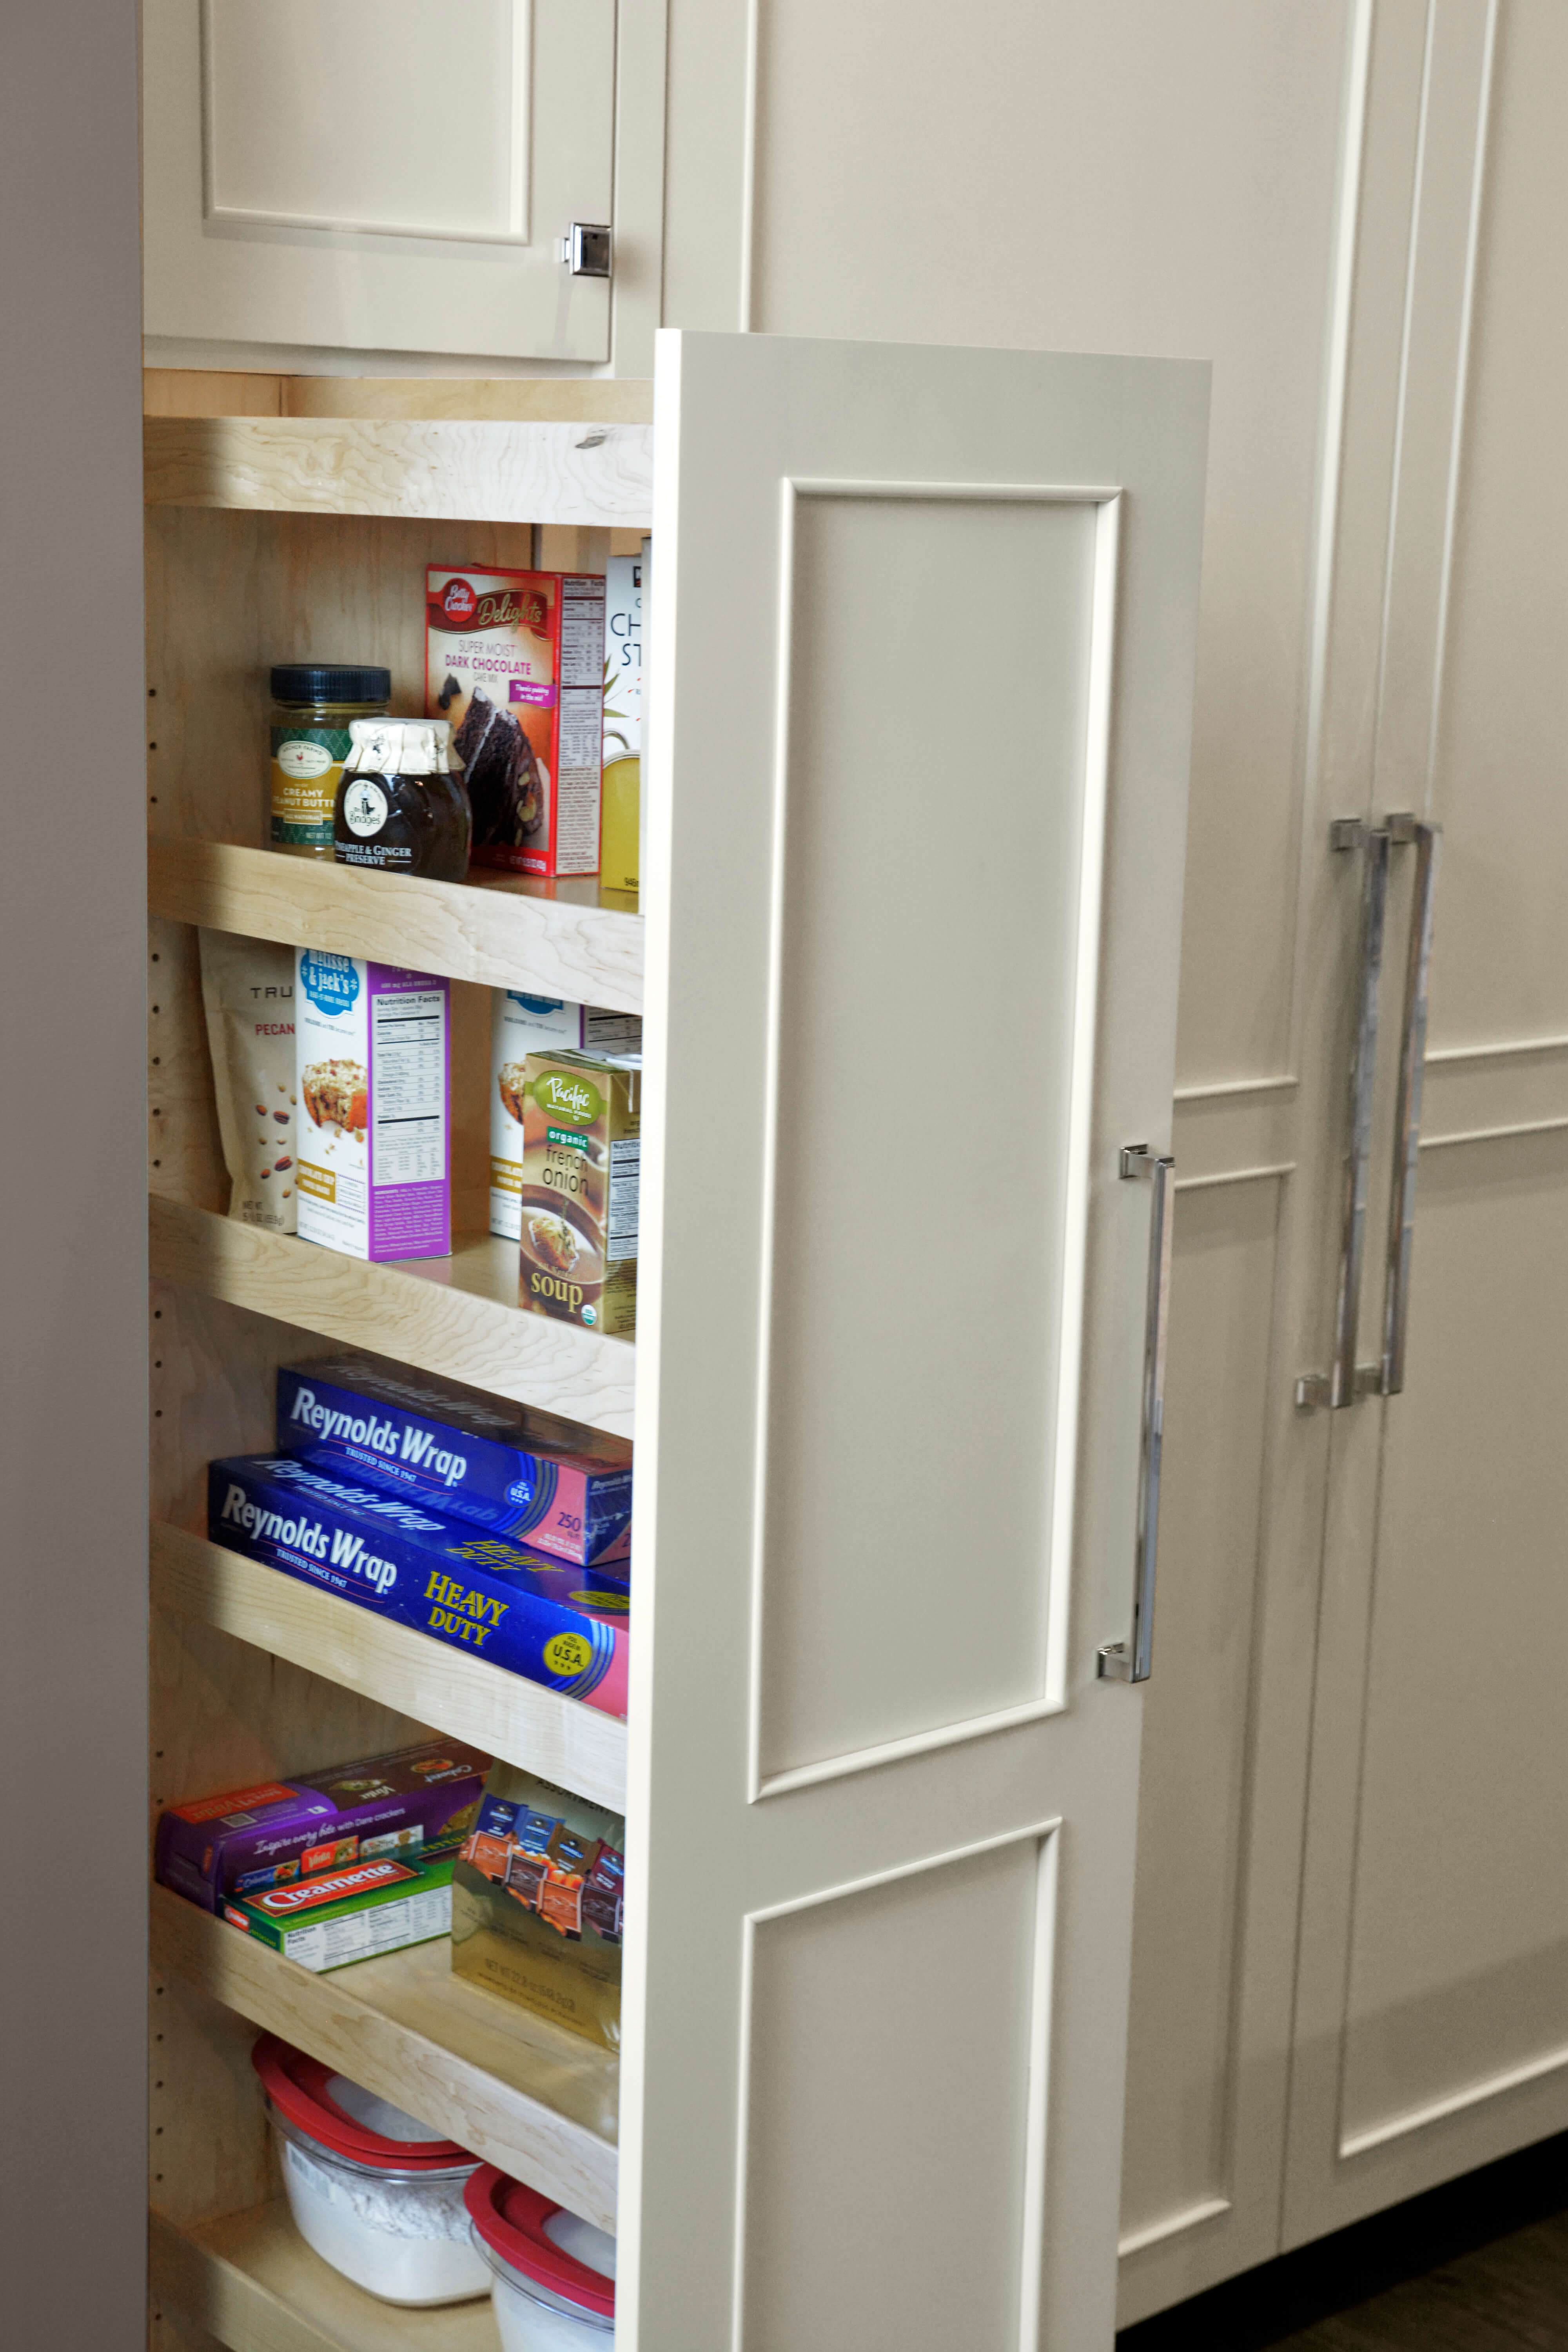 Dura Supreme's Tall Pull-Out Pantry provides an amazing amount of storage on full extension glides. Available with wood (shown) or wired shelves. Discover pantry storage solutions for your kitchen remodel project.